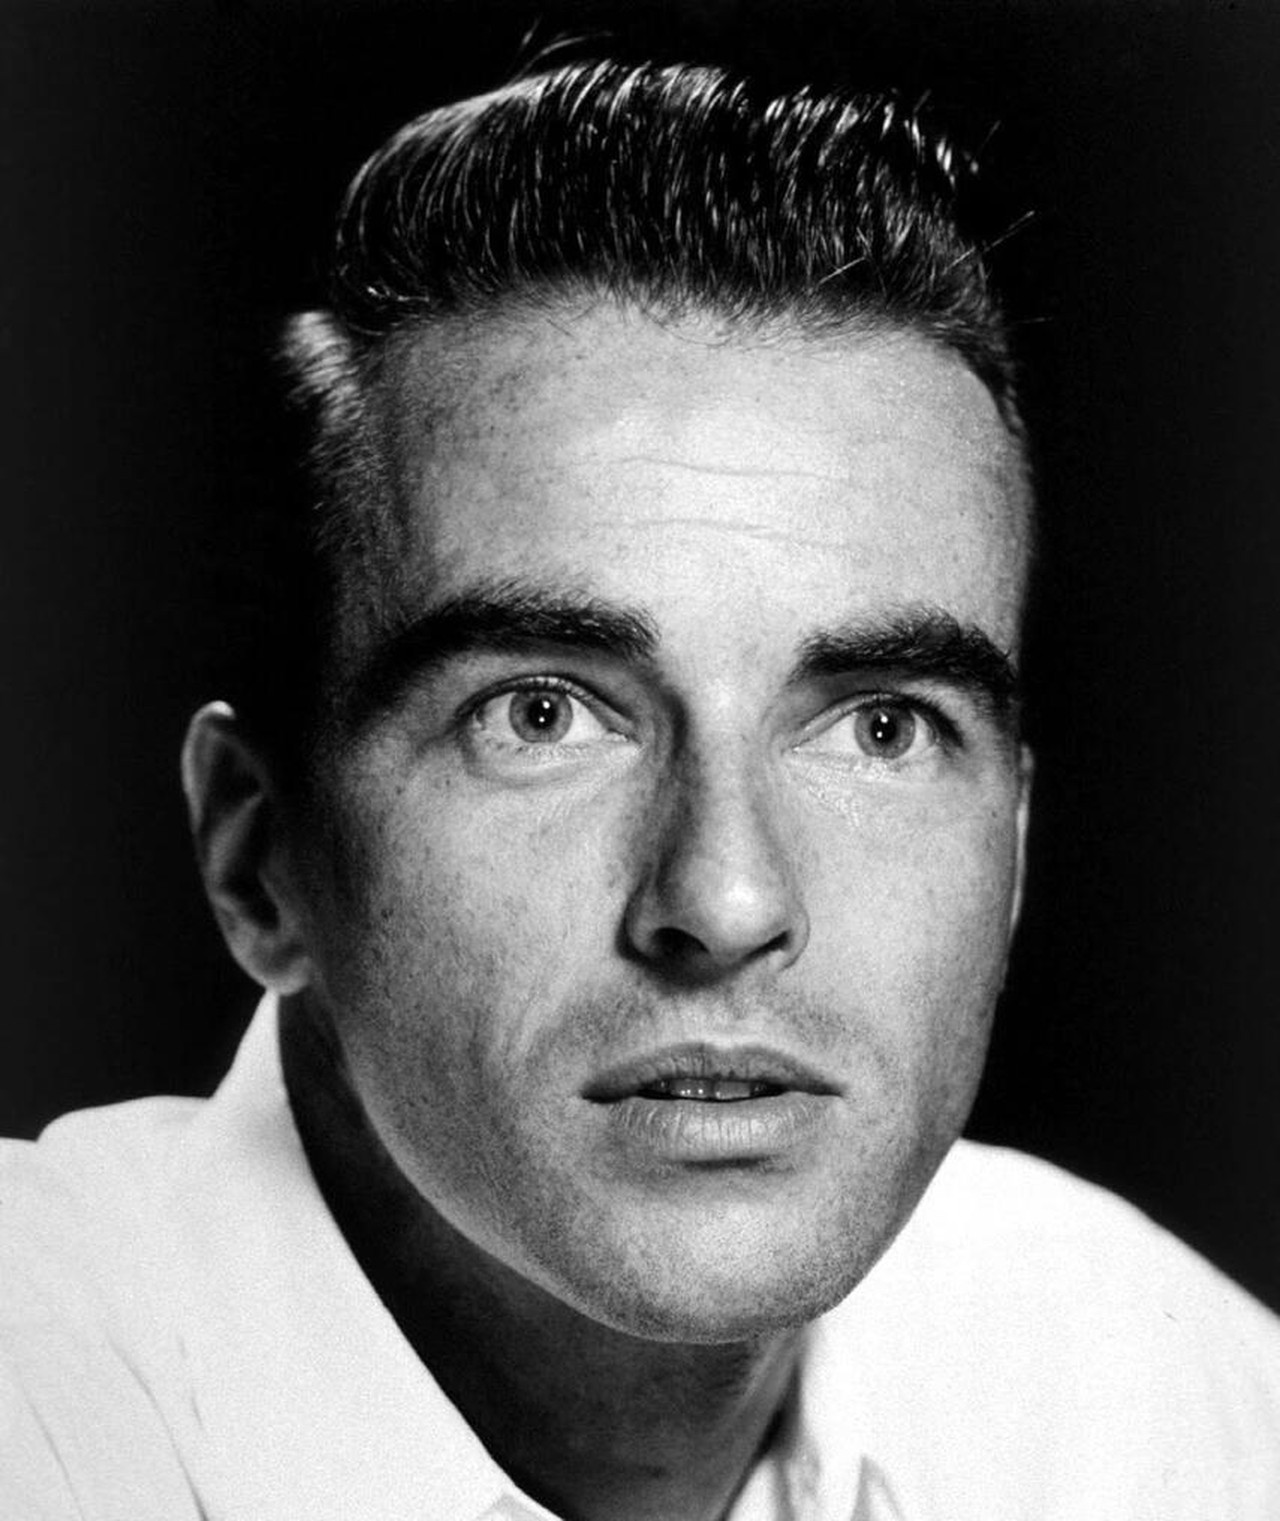 Photo of Montgomery Clift